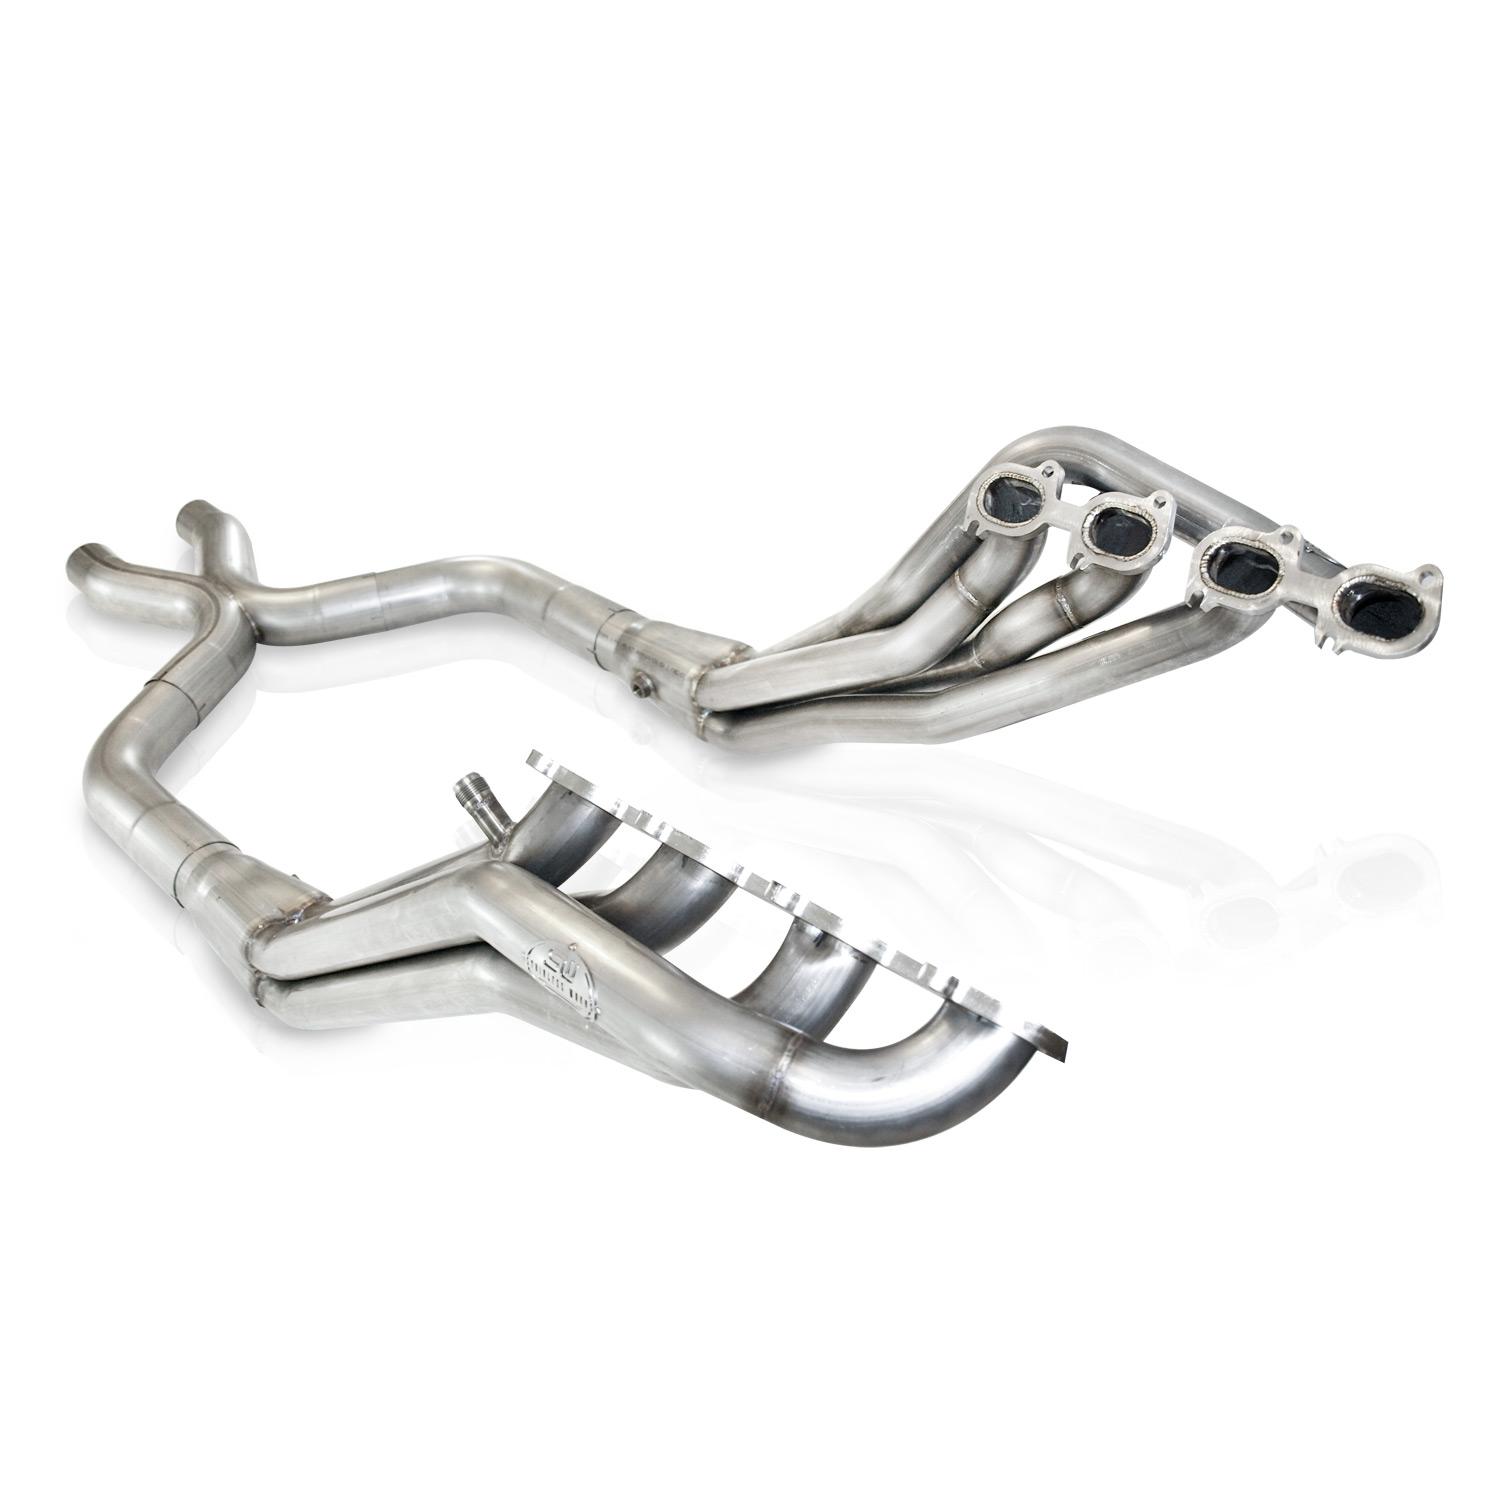 2007-2014 Ford Mustang GT500 Stainless Works 1 7/8" Long Tube Headers w/3" Collectors & 3" Offroad Xpipe